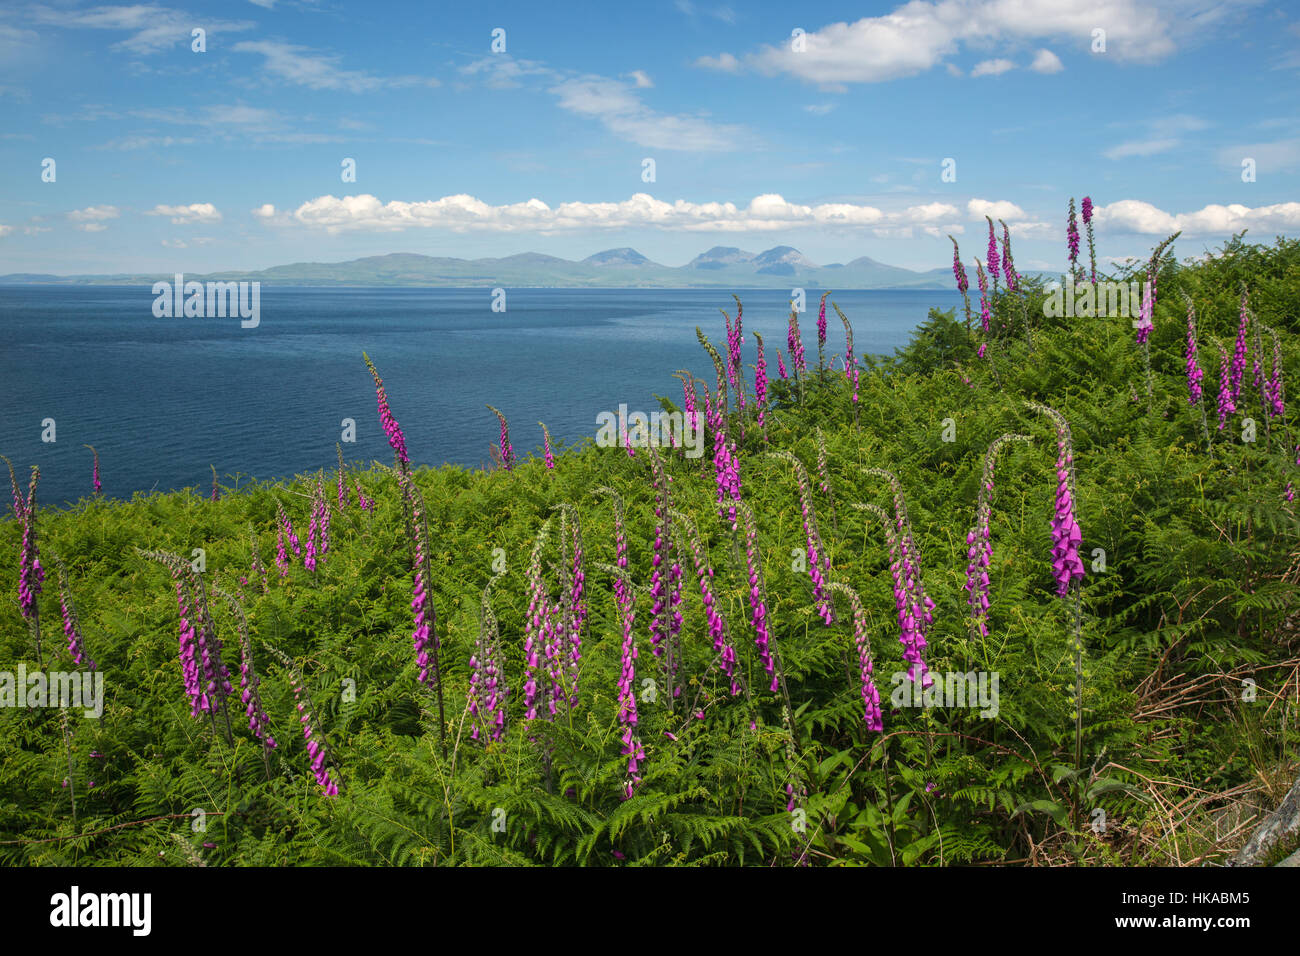 Looking out to the Isle of Jura from the Isle of Gigha, Scotland Stock Photo